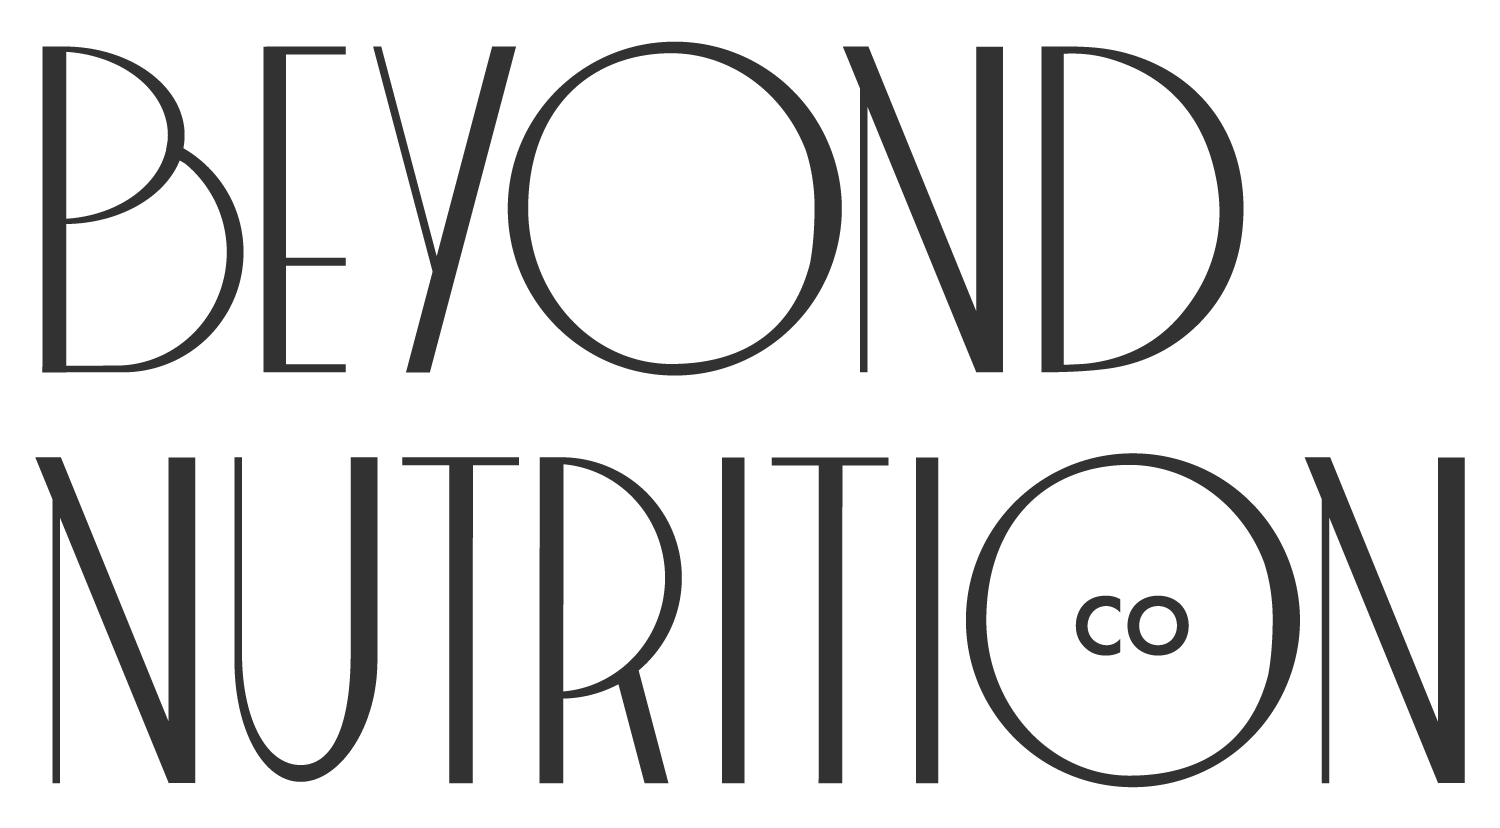 beyond nutrition co